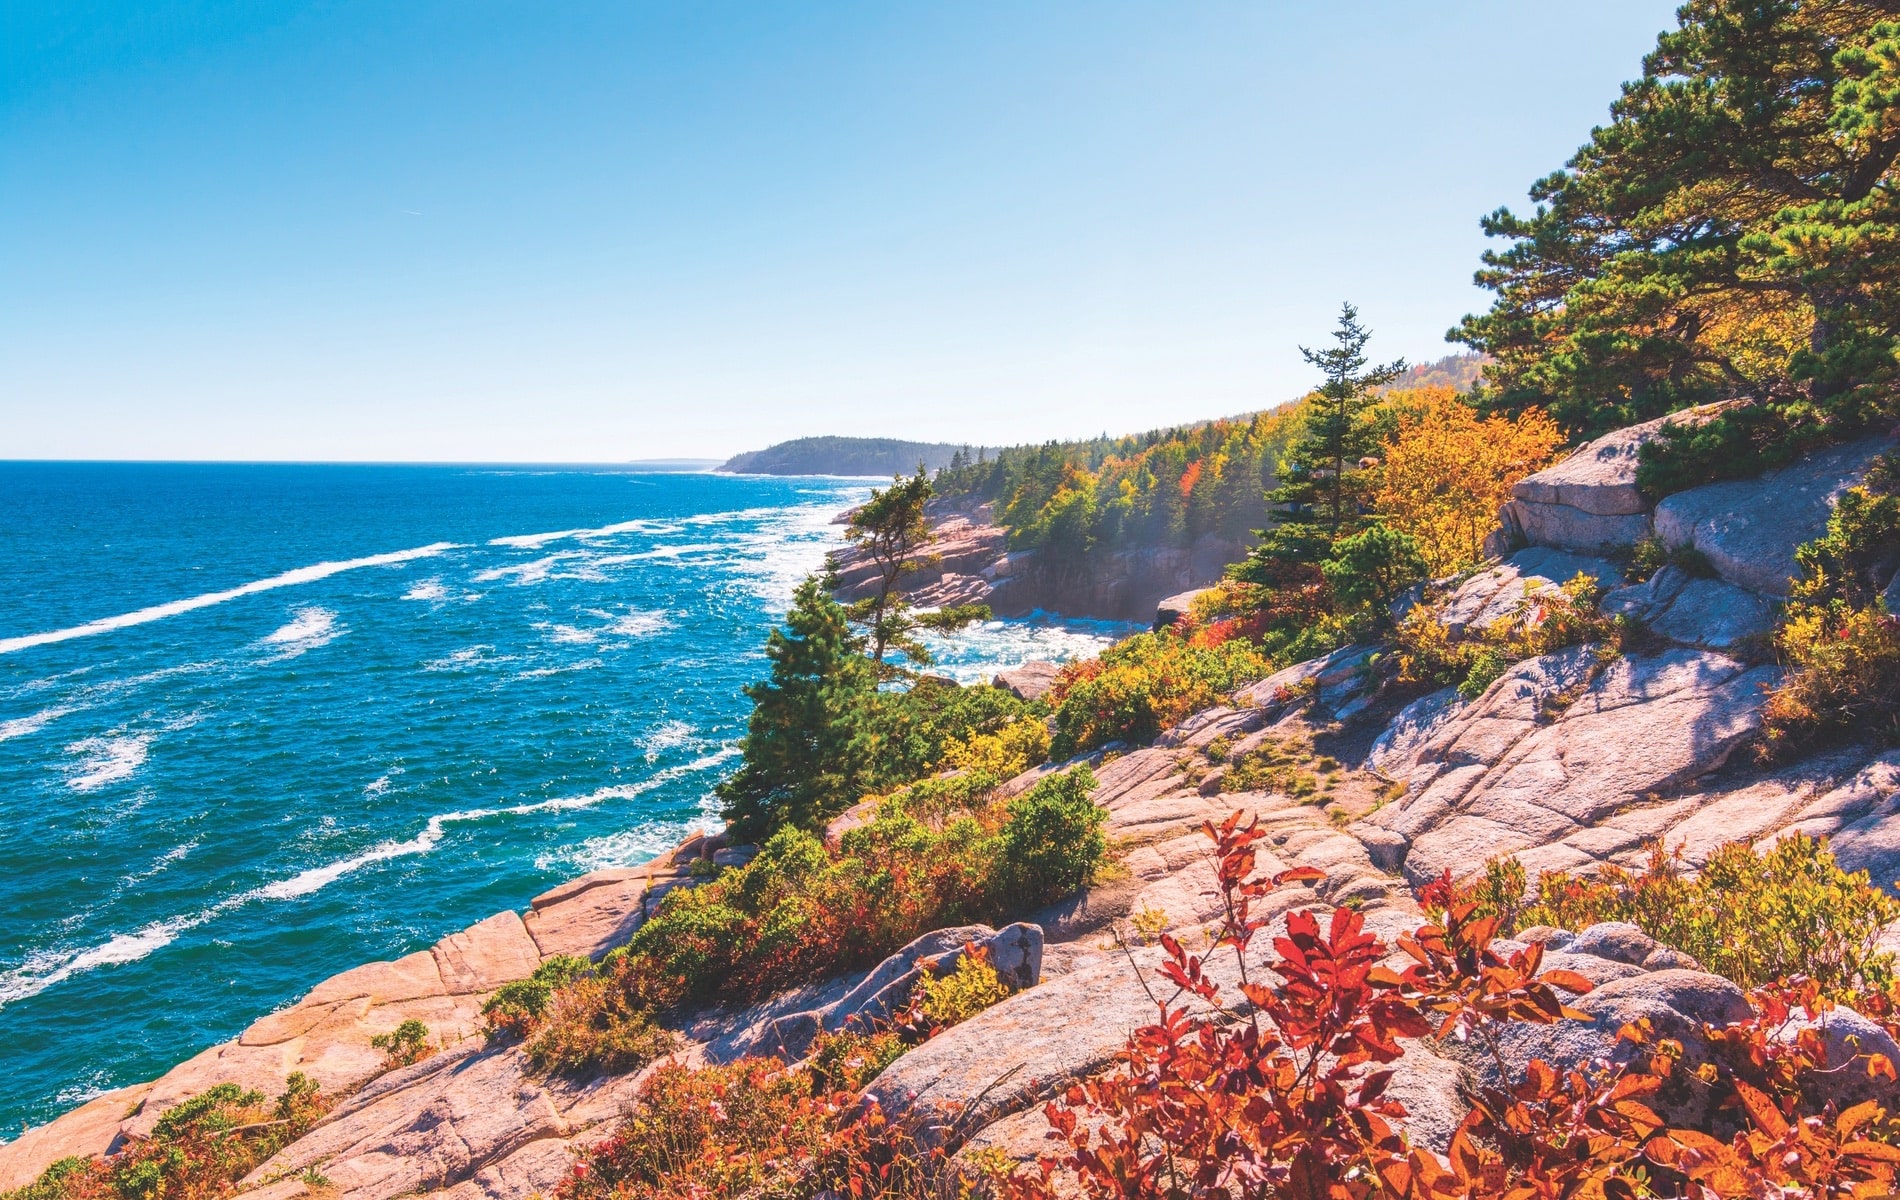 A view of Maine’s rocky coastline from Acadia National Park